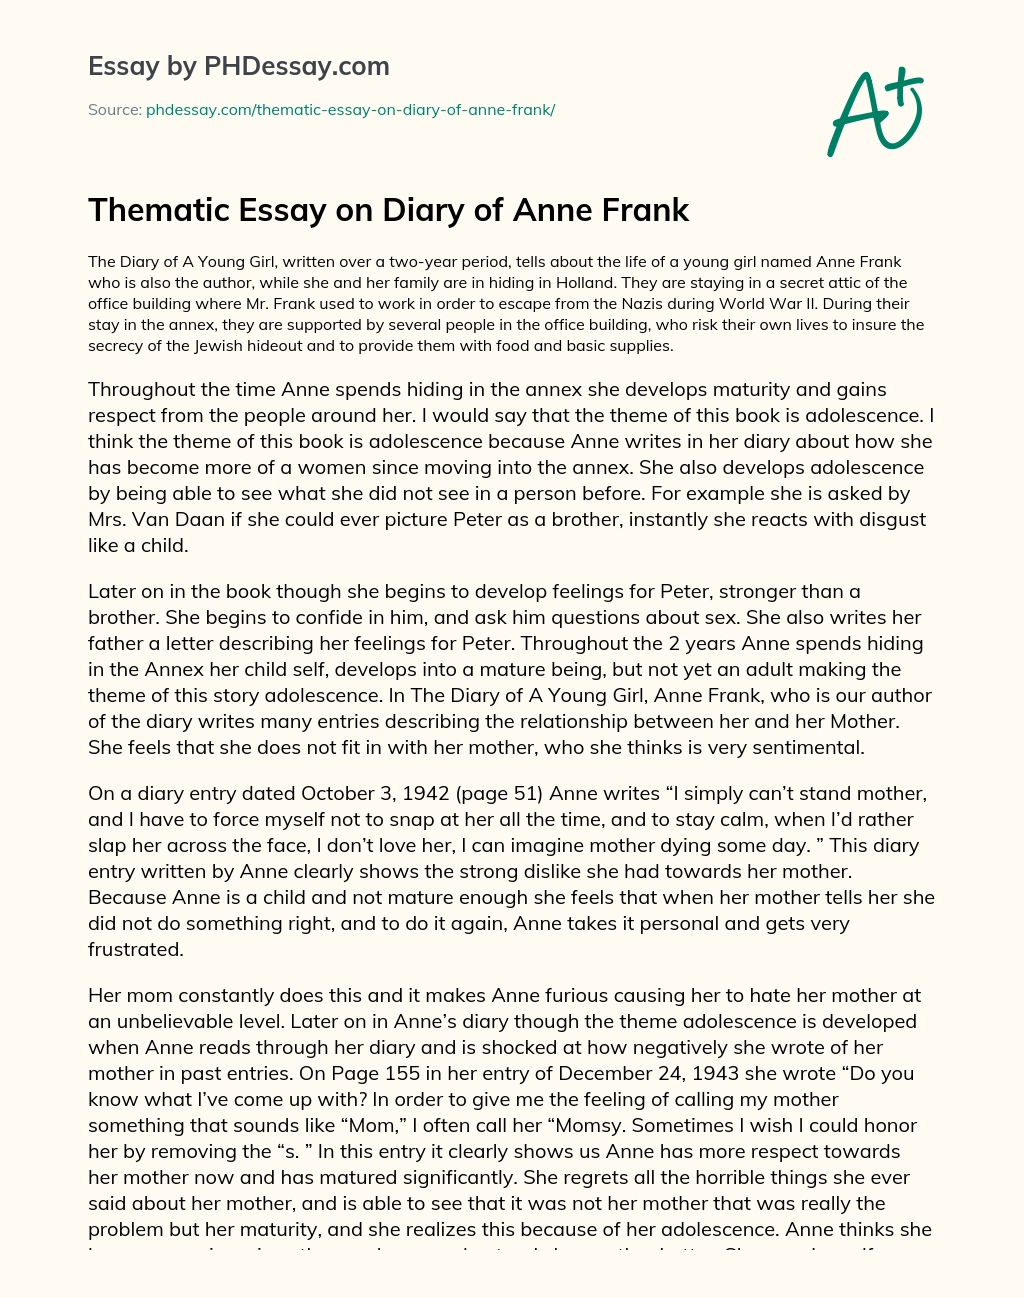 Thematic Essay on Diary of Anne Frank essay